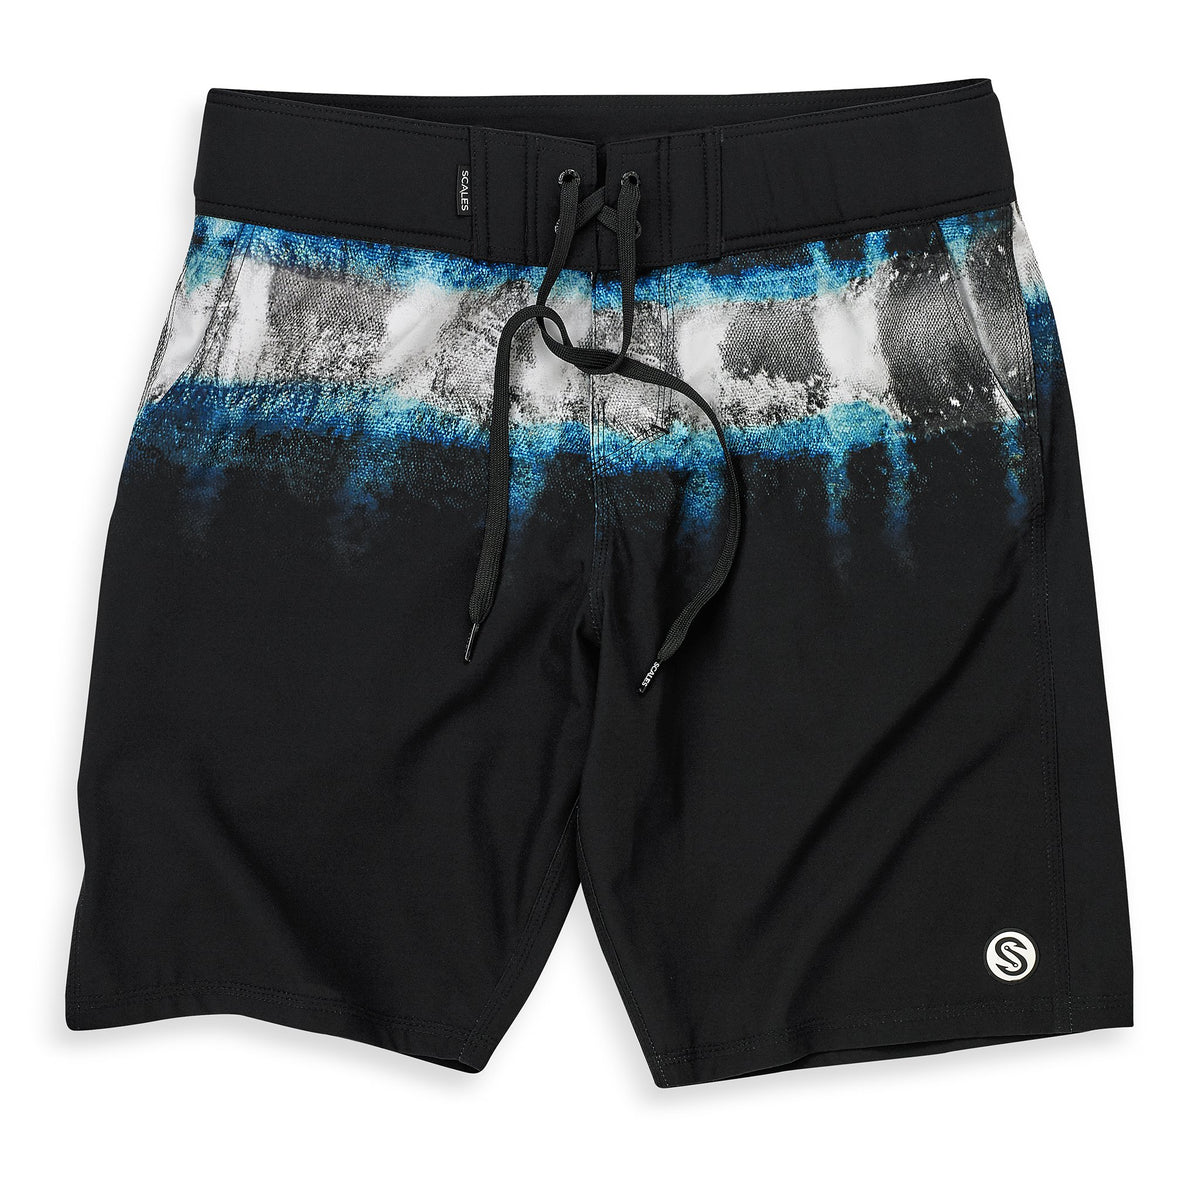 SCALES Hoo Stripes First Mates Boardshorts